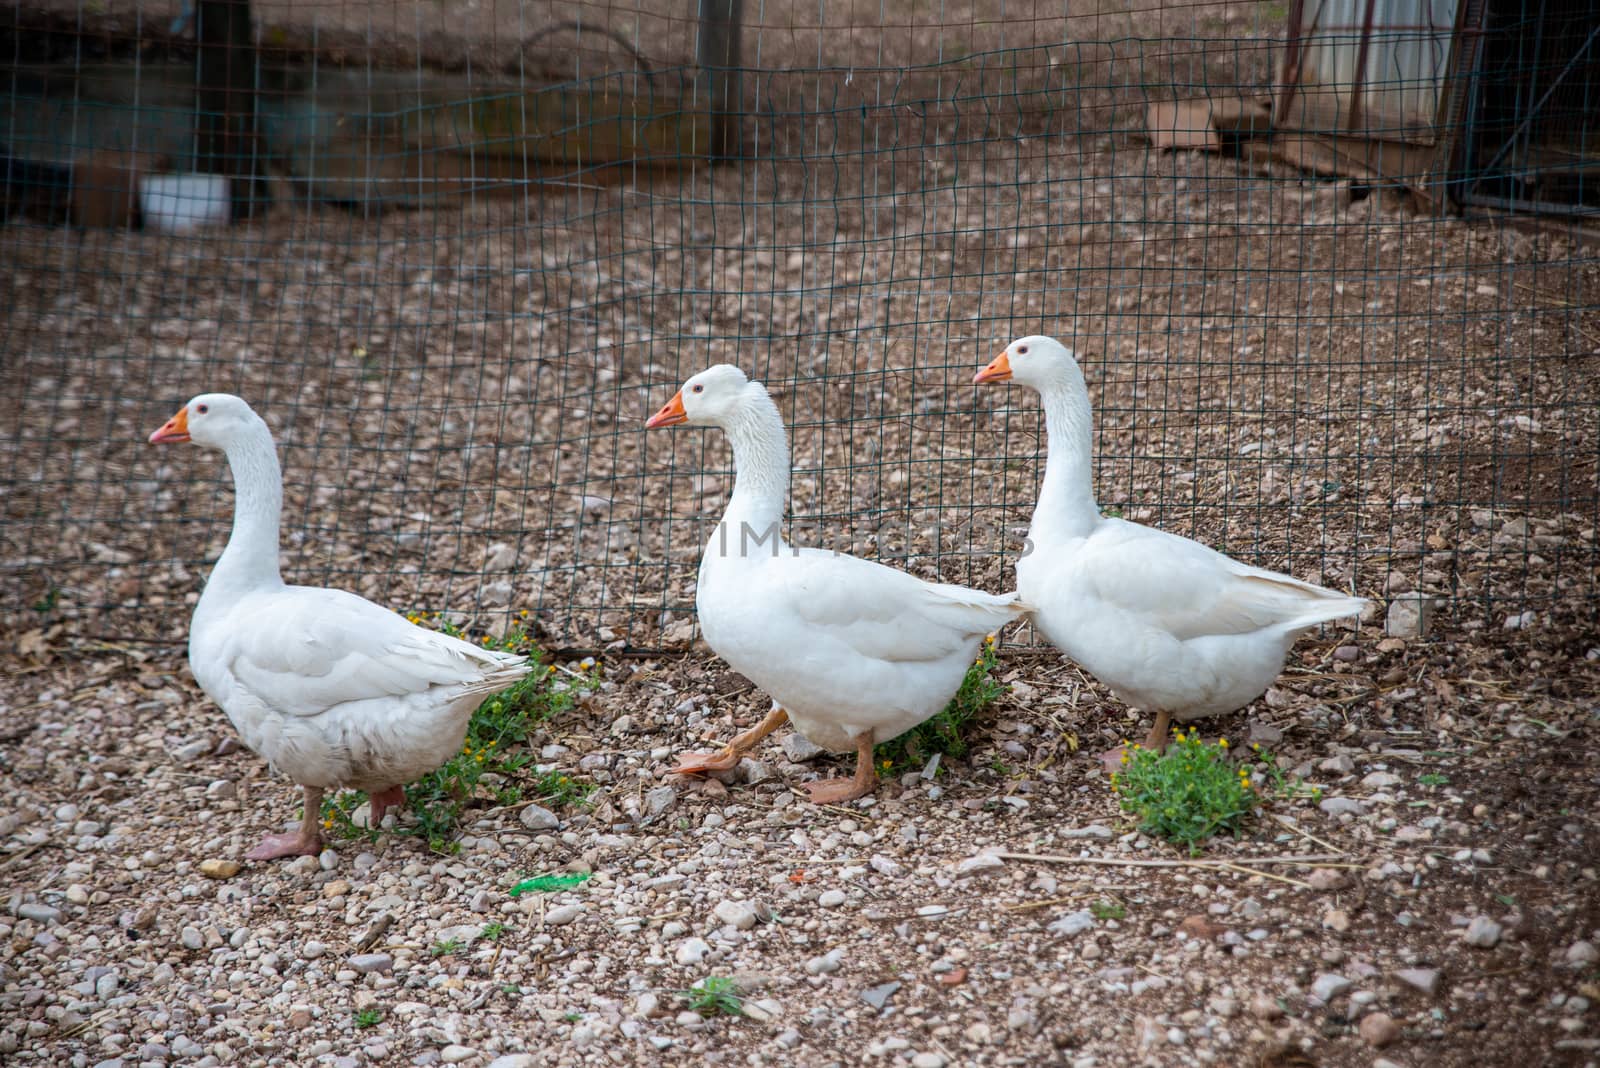 WHITE GROUND GEESE IN THE COURTYARD